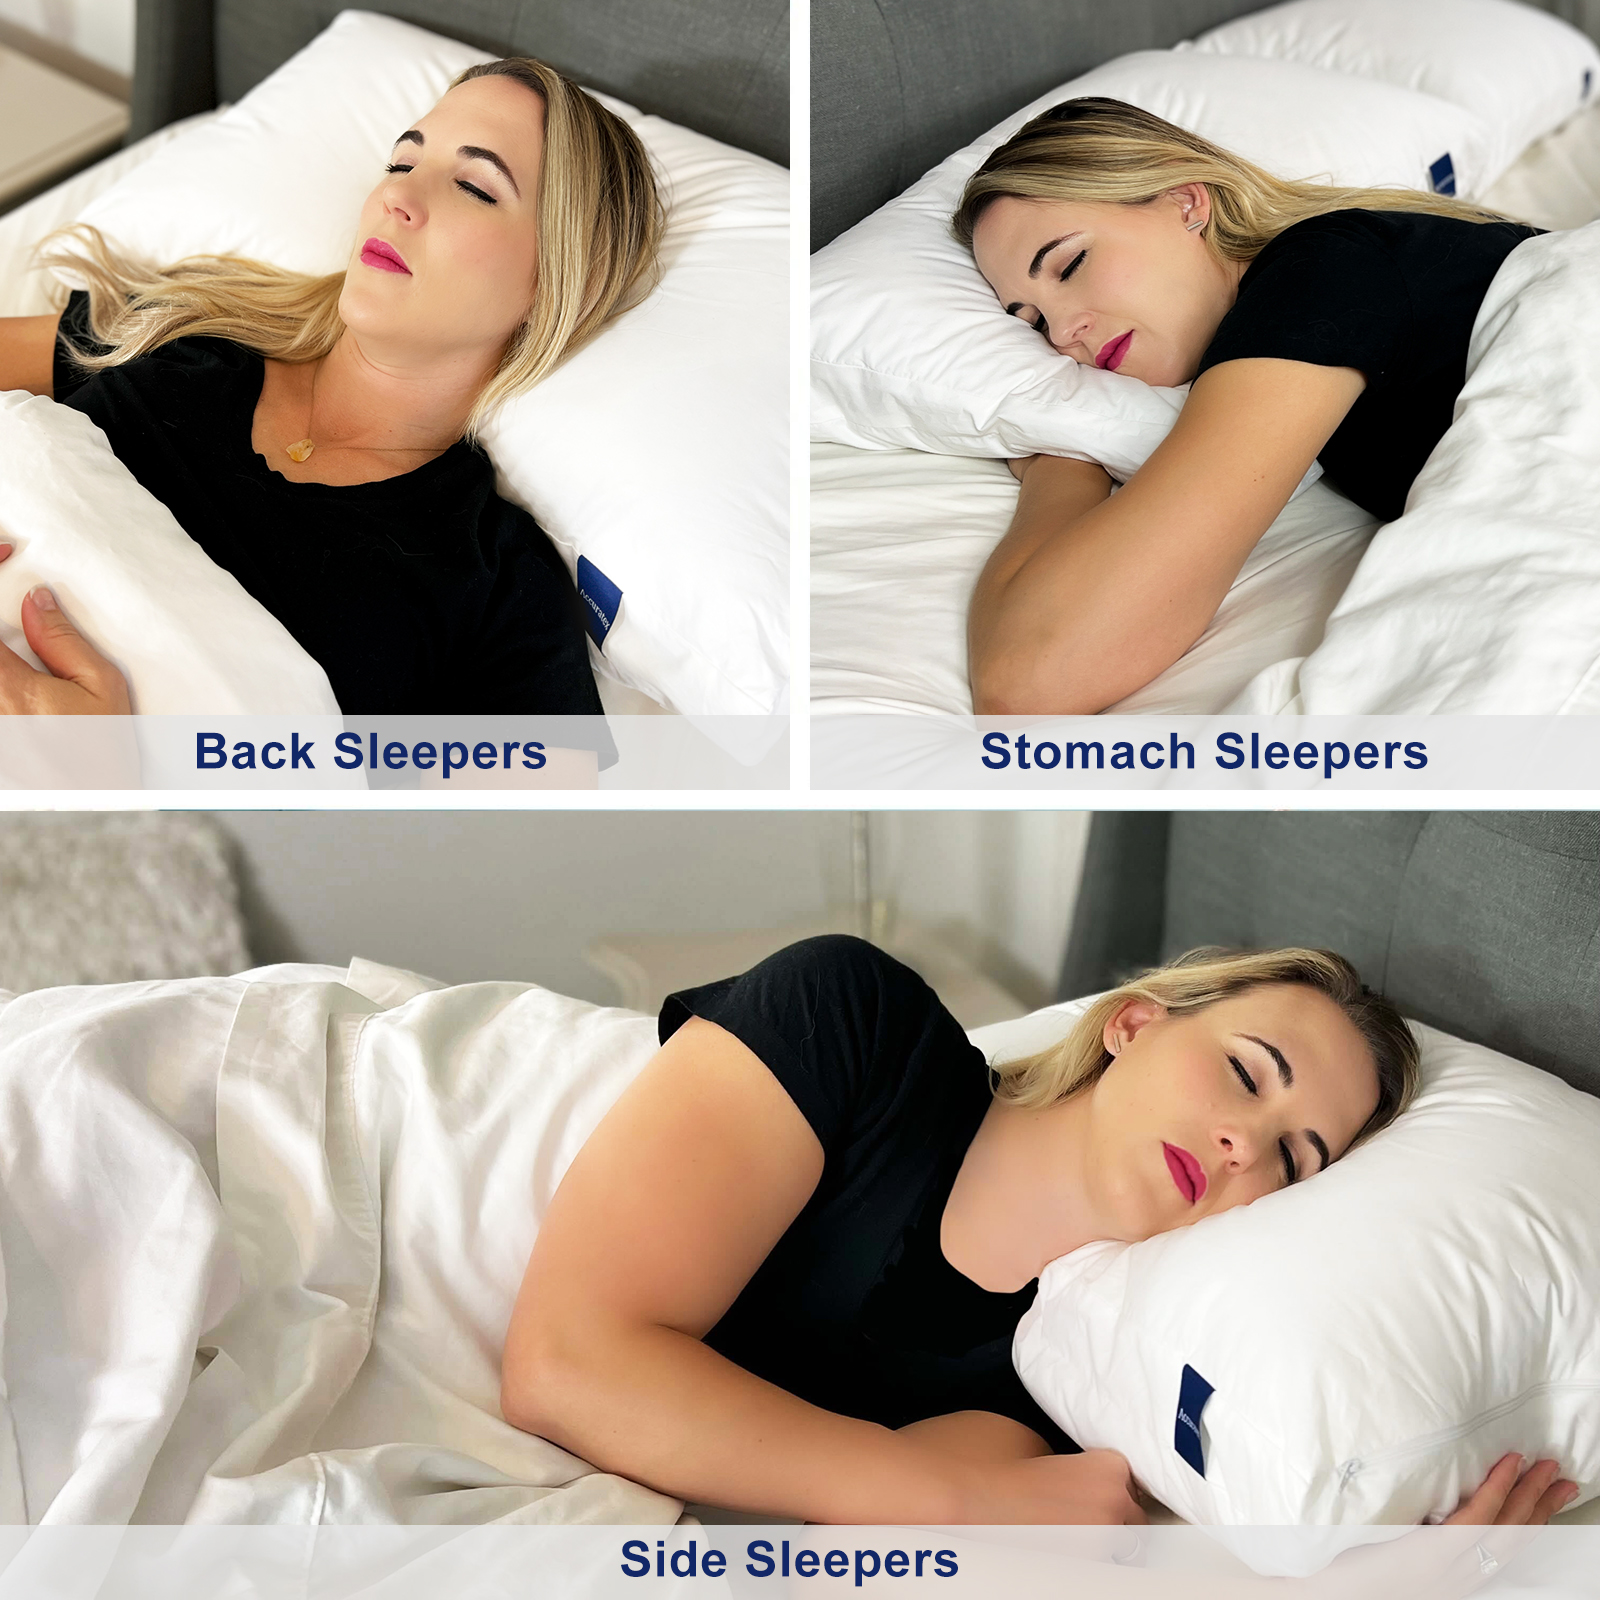 ACCURATEX Premium Bed Pillows Standard Size Set of 2, Shredded Memory Foam Pillow Hybrid with Fluffy Down Alternative Fill Removable Cotton Cover, Adjustable Firm Pillow for Side,Back,Stomach Sleepers - image 5 of 6